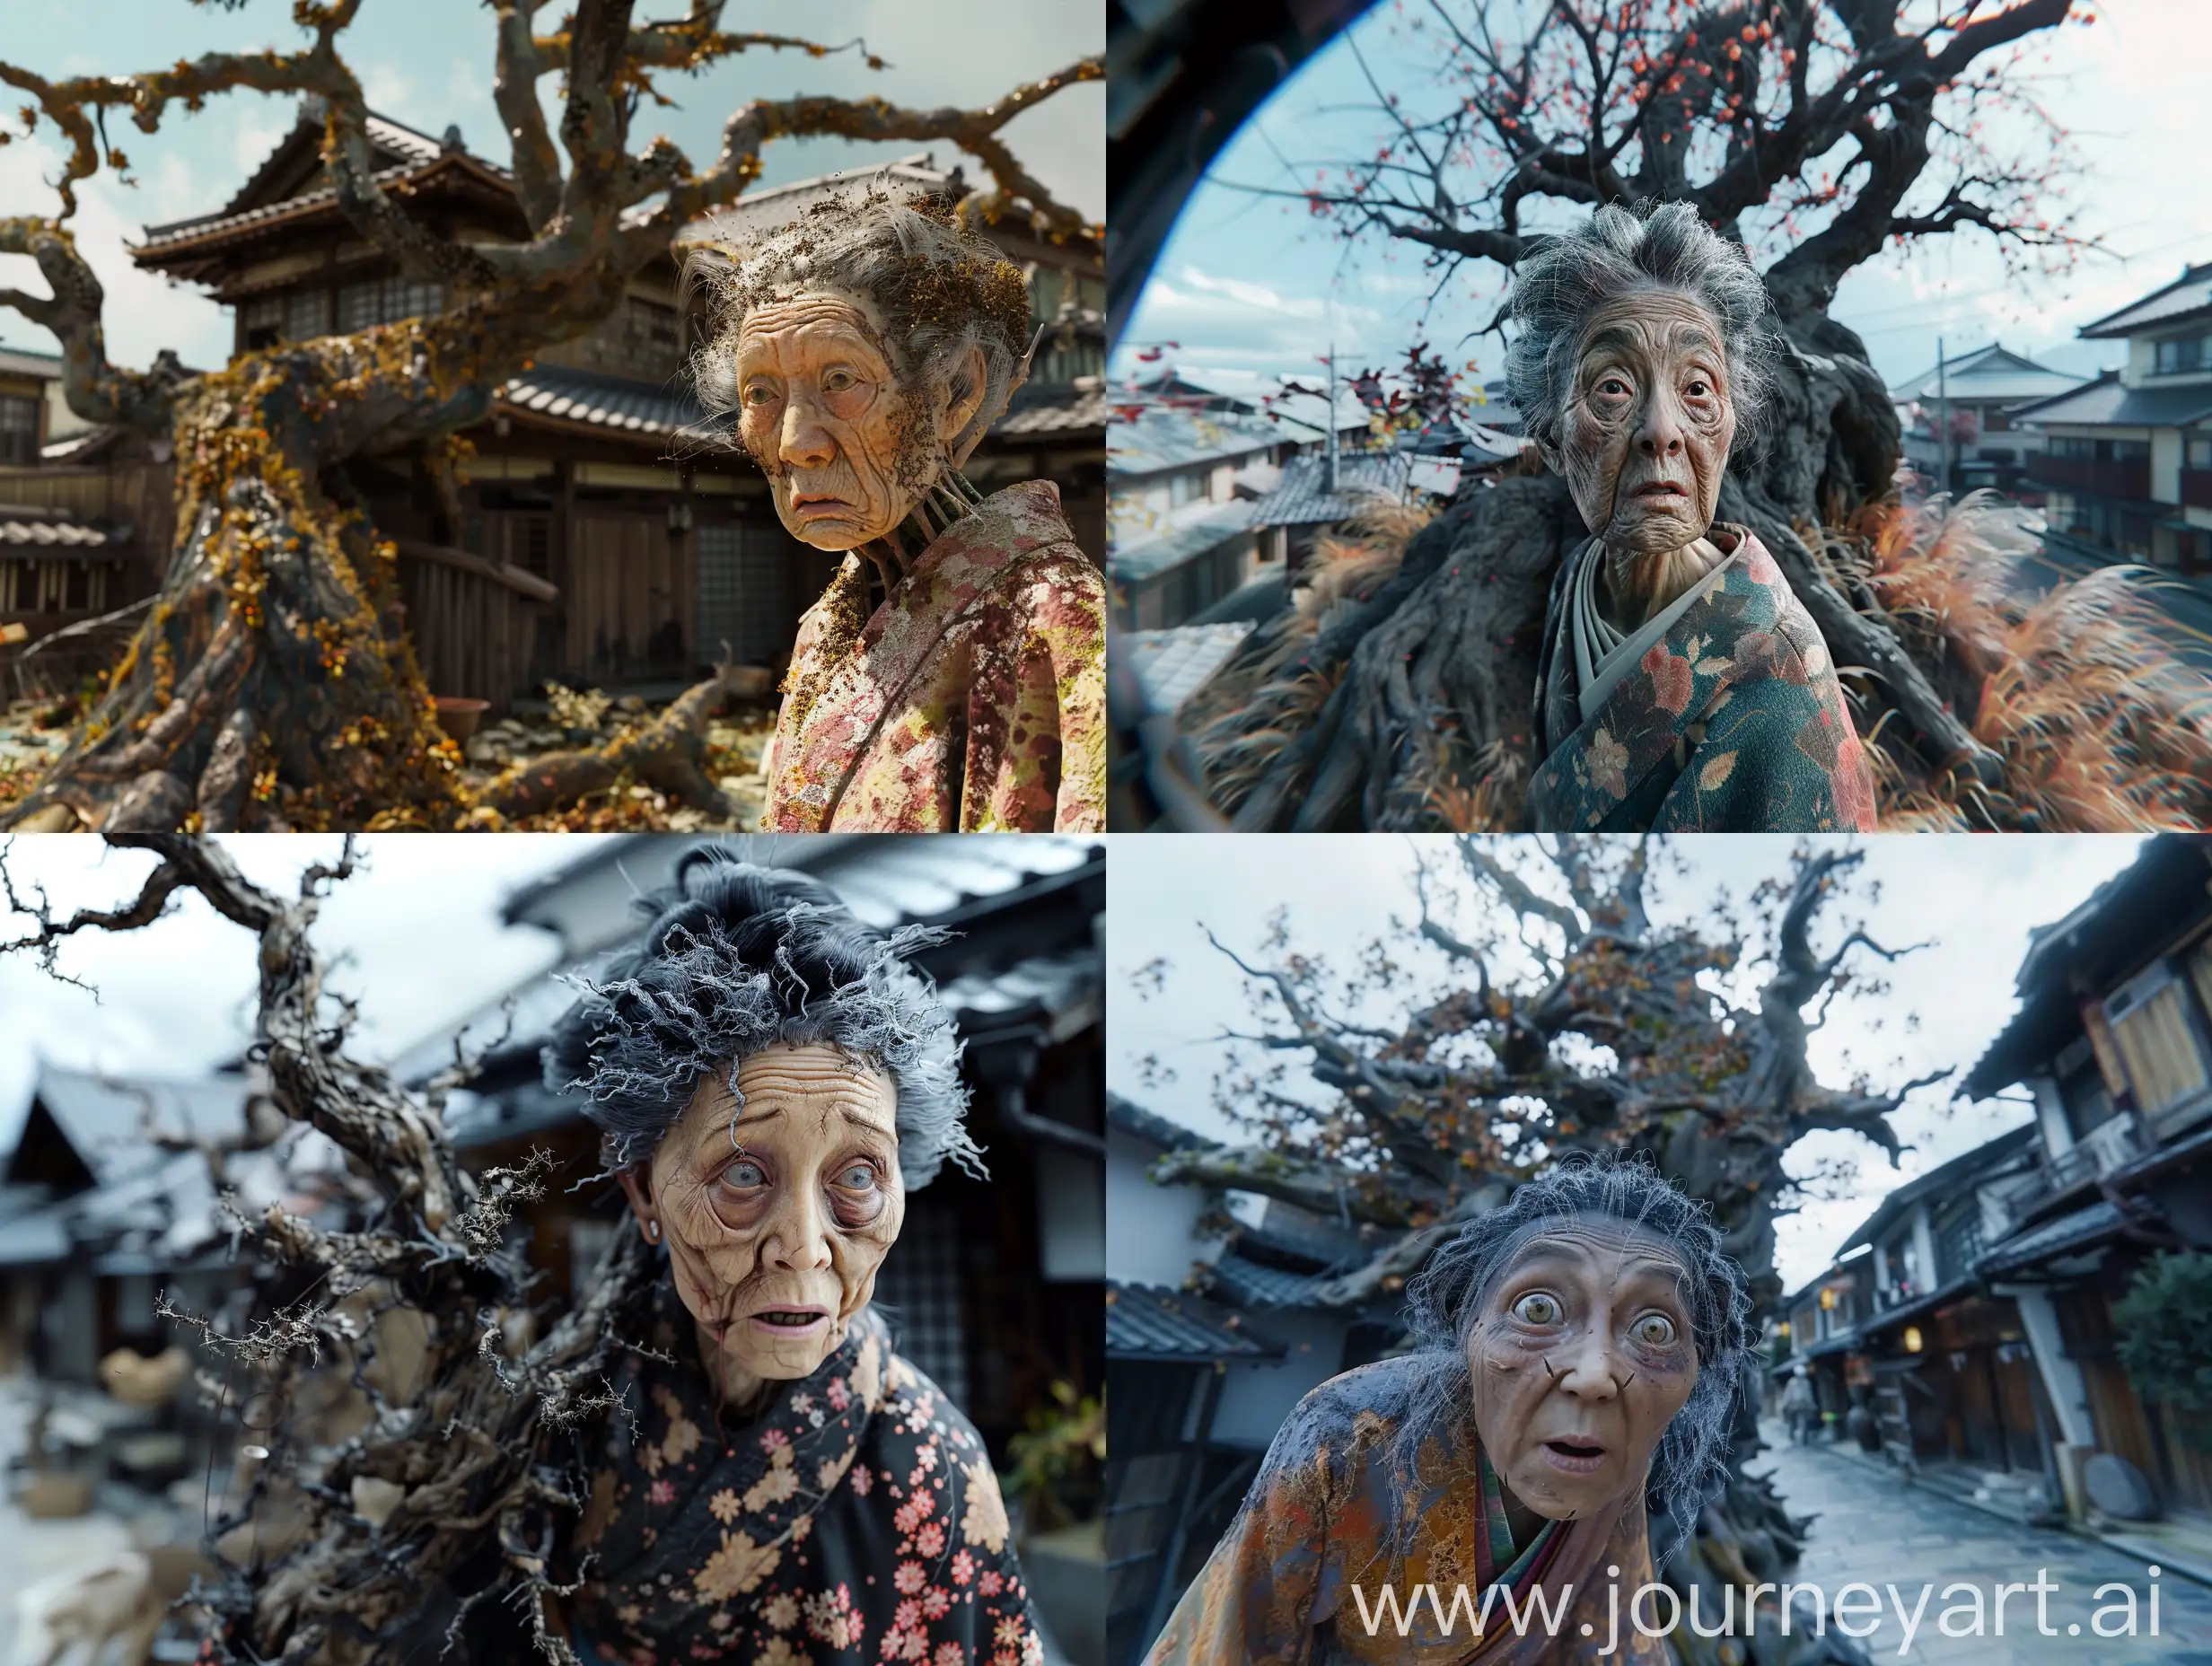 cinematic, realism, Using (((imagination))) to craft a photorealistic representation of an unusual fantasy dream, this image should be a panoramic shot, skillfully captured through an EE 70mm lens, providing a professional movie feel. The shot opens with a wide-shot  view of a picturesque scene, capturing A Japanese old man combined with an old withered tree, yokai. The UHD camera captures every detail of this moment, highlighting the colors and textures. With Scorsese's expert direction, this scene exudes drama and invites the audience to immerse themselves in the science fiction and weird future world, Generate a cinematic and highly detailed Al image of The strange world of the ghost bride, Render her in a photorealistic style, cinematic, capturing the fine details of her features, clothing, and surroundings. The woman should exude with a feeling of fear, Pay close attention to realistic skin tones, textures, and lighting conditions. Ensure the image is in high resolution, such as 8K, to showcase the intricate details and allow
